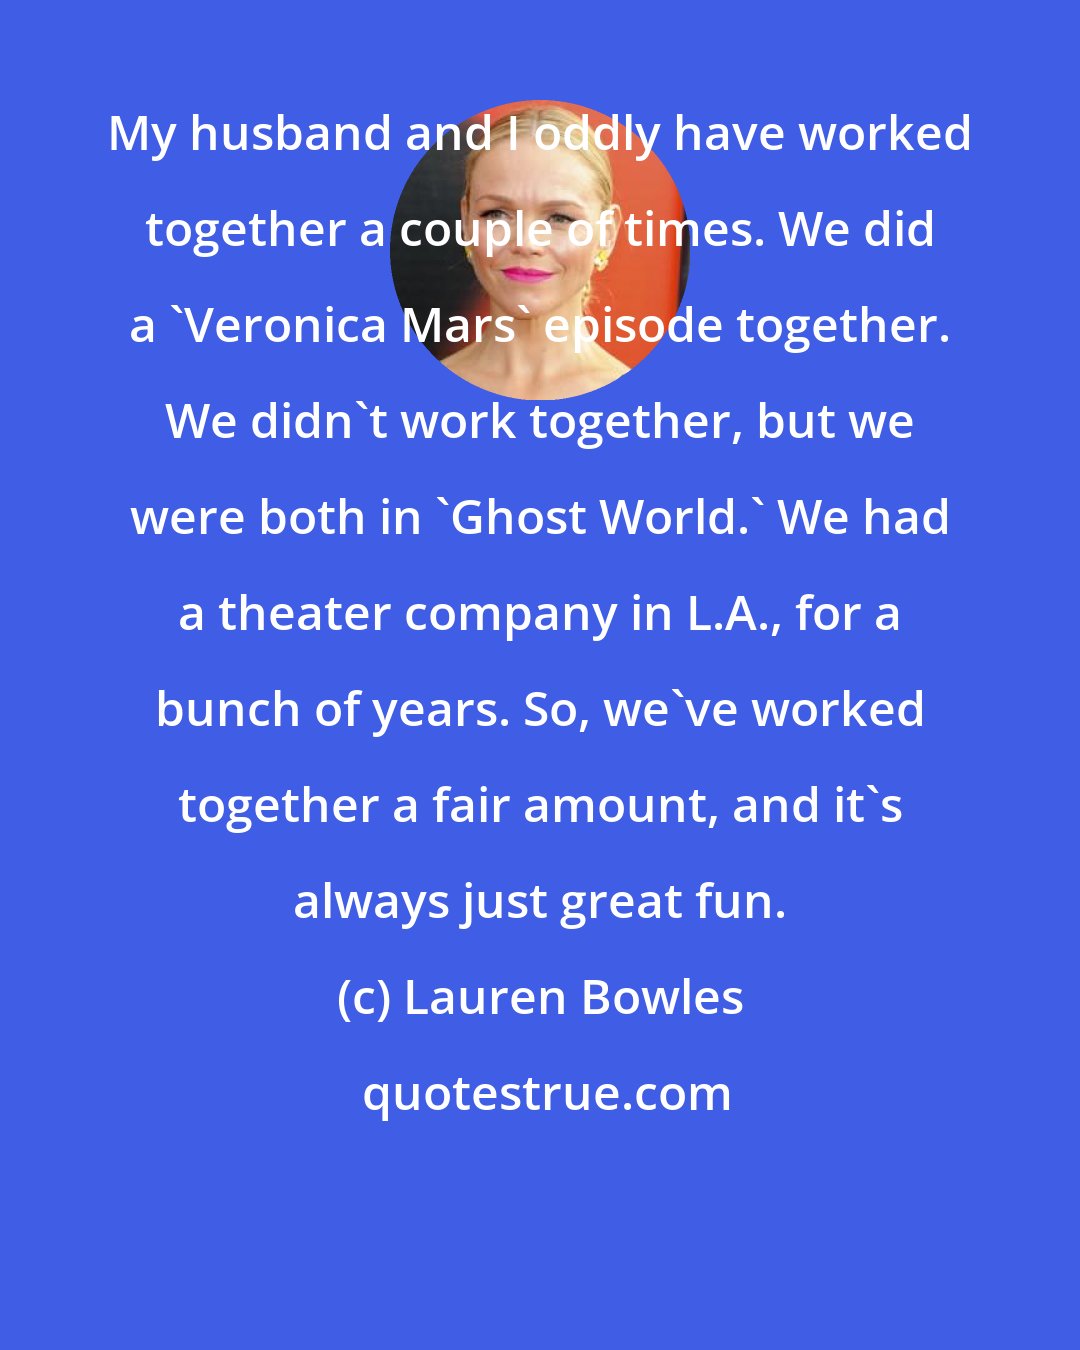 Lauren Bowles: My husband and I oddly have worked together a couple of times. We did a 'Veronica Mars' episode together. We didn't work together, but we were both in 'Ghost World.' We had a theater company in L.A., for a bunch of years. So, we've worked together a fair amount, and it's always just great fun.